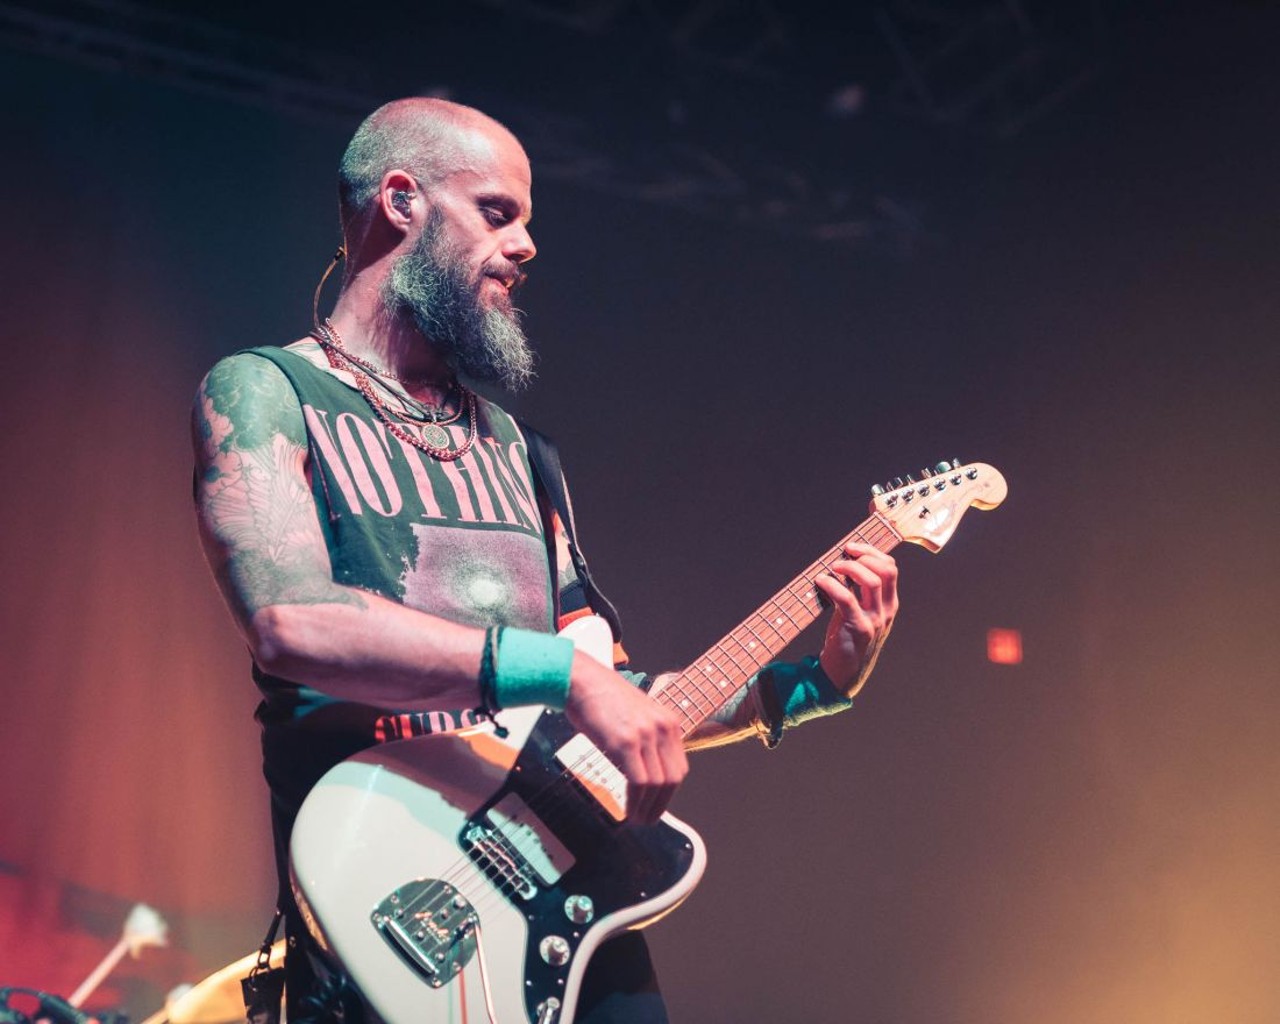 Baroness, Deafheaven and Zeal & Ardor Performing at the Agora